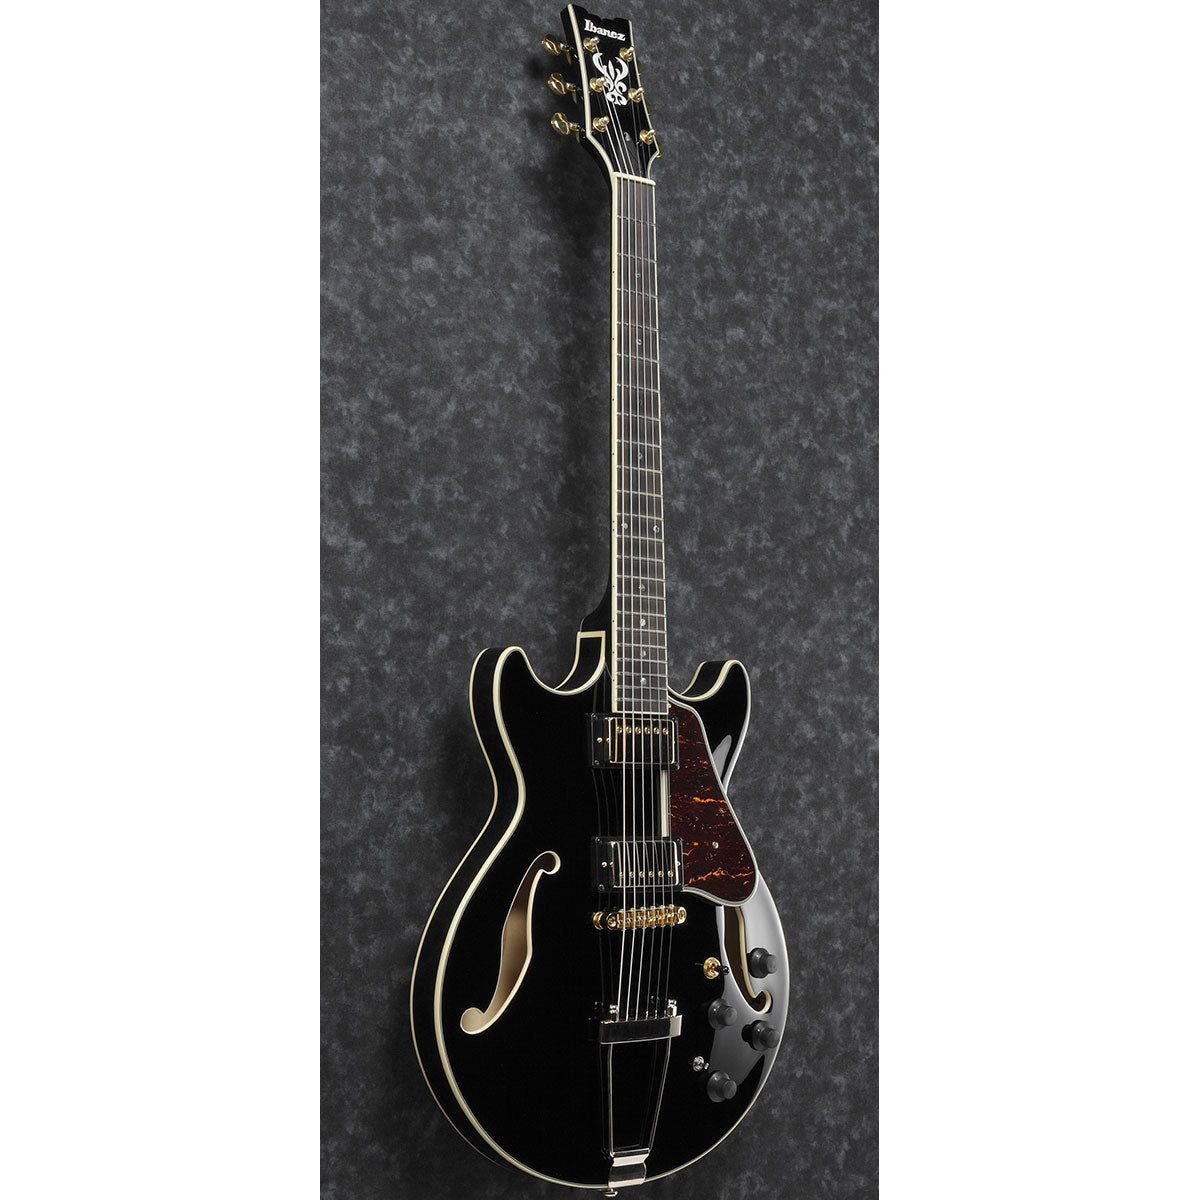 Ibanez AMH90 AM Artcore Expressionist Semi-Hollow Electric Guitar - Black